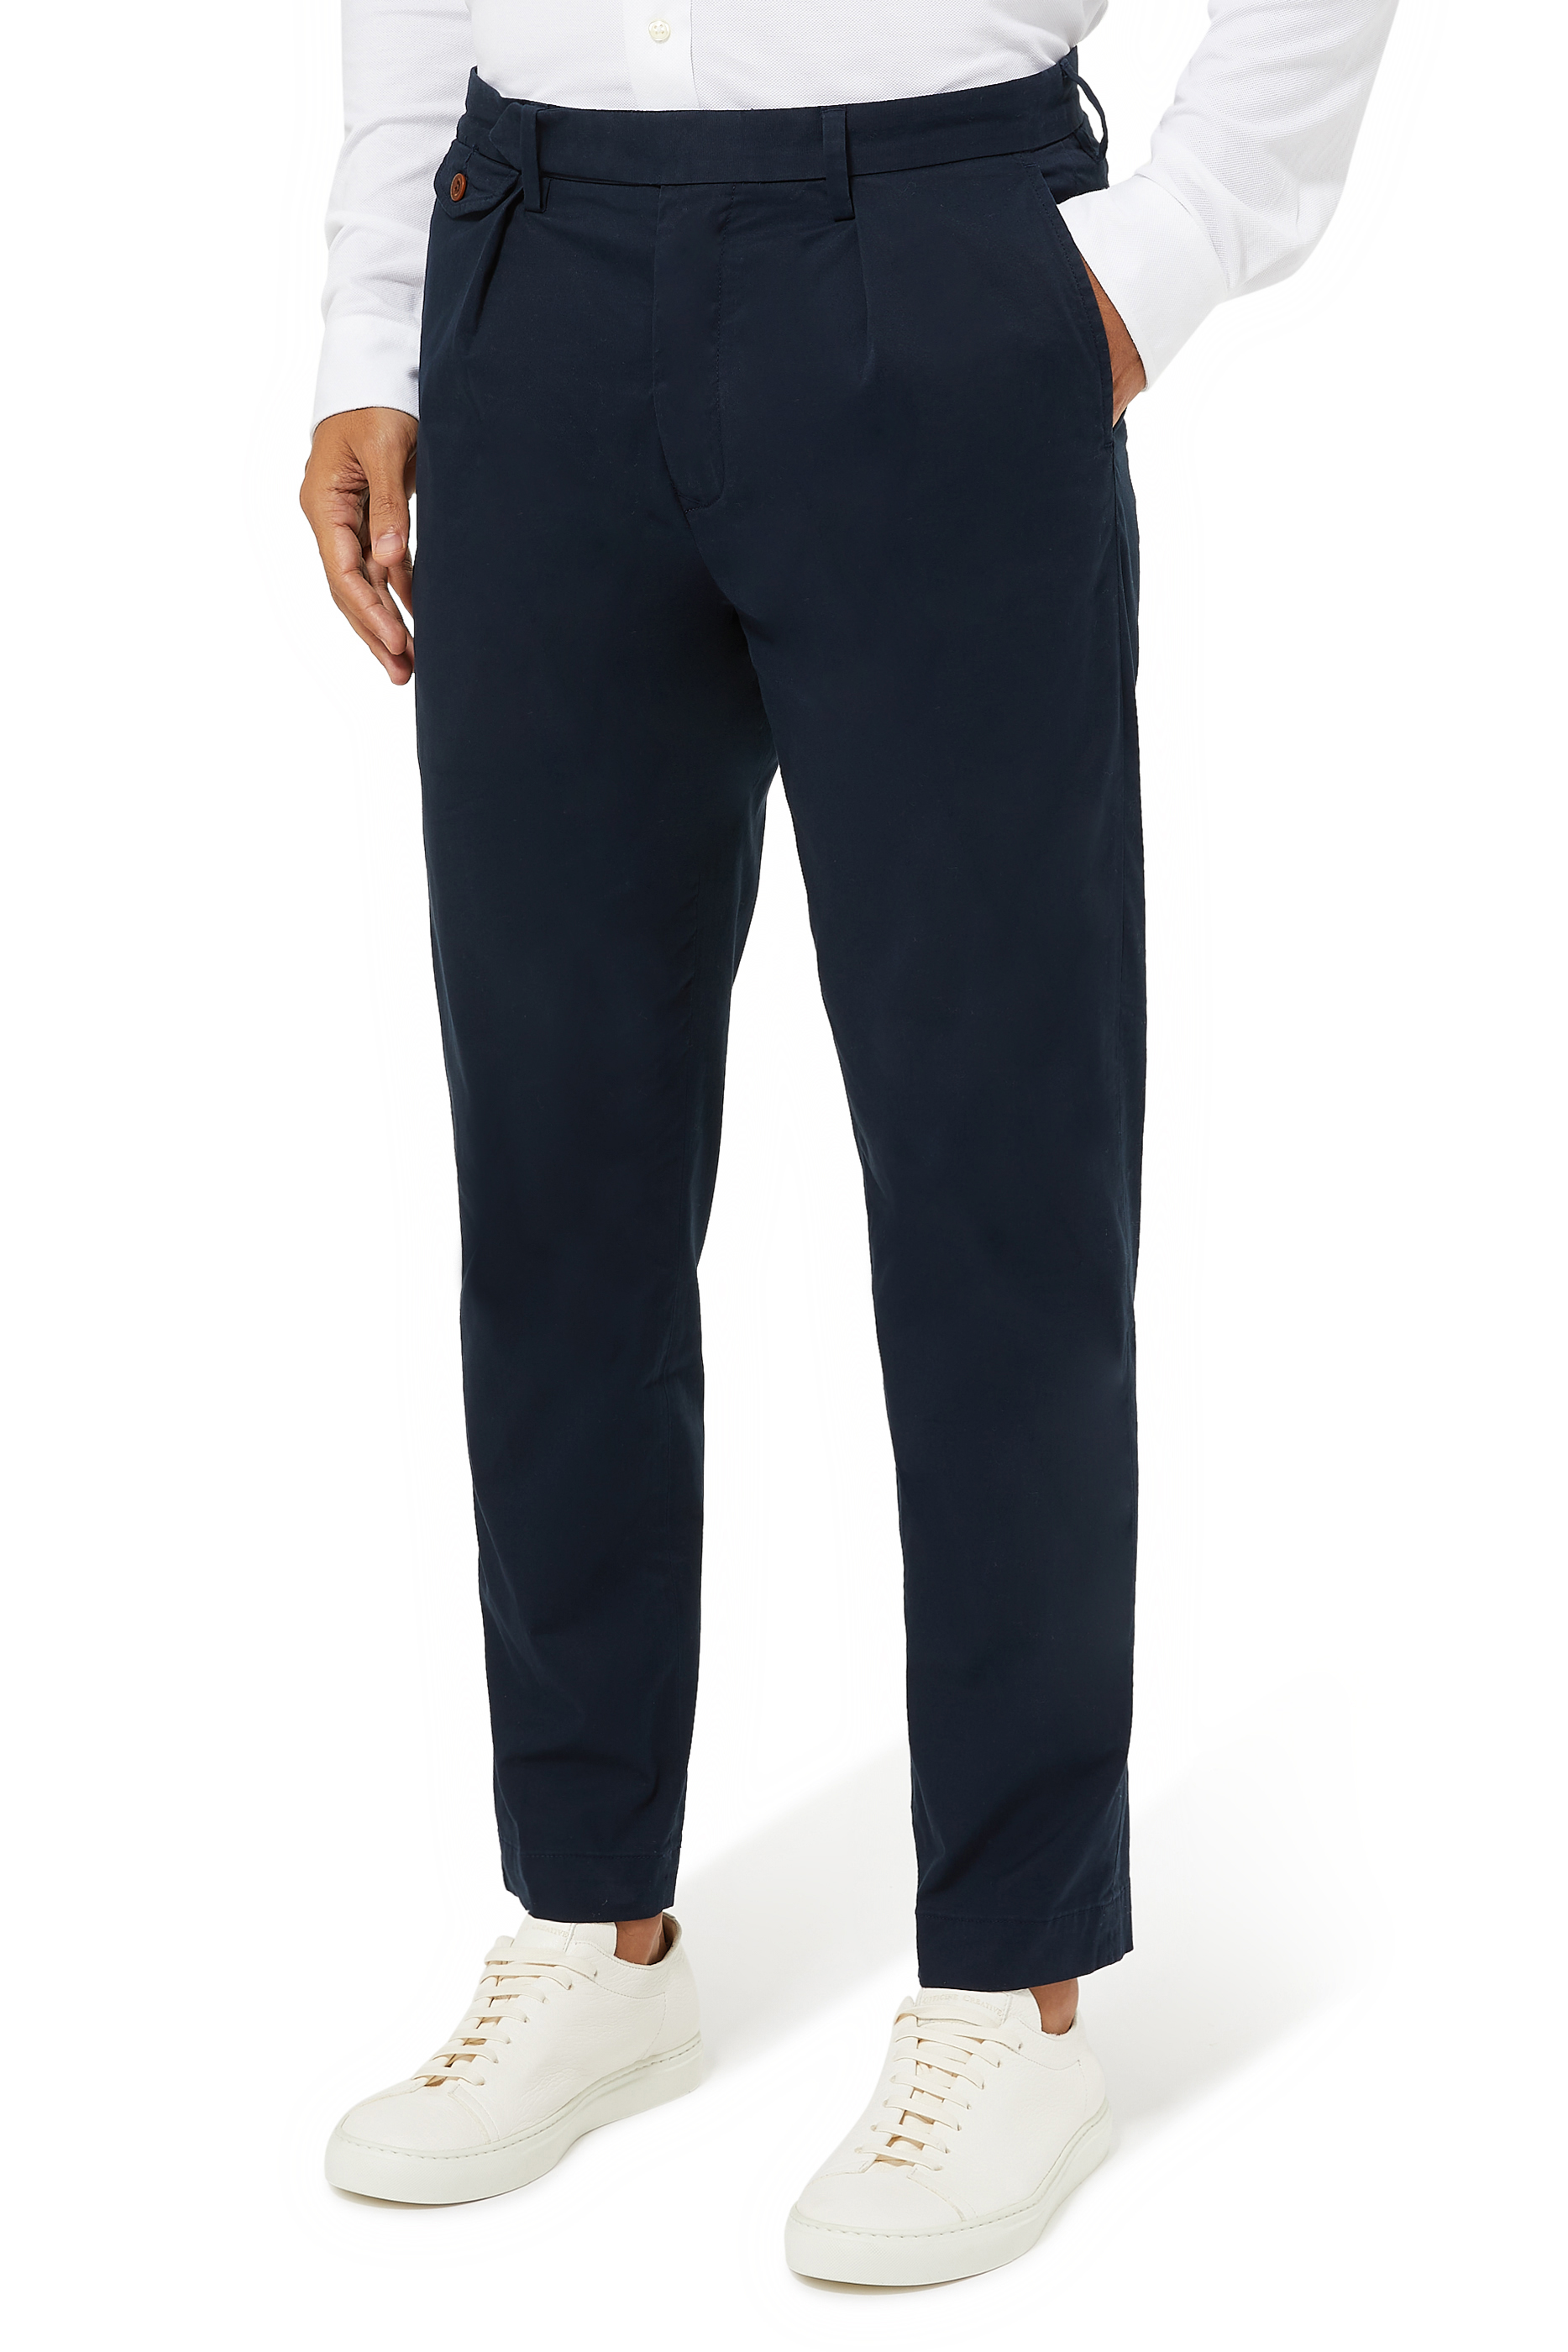 Buy Polo Ralph Lauren Cotton Pleated Pants for Mens | Bloomingdale's Qatar